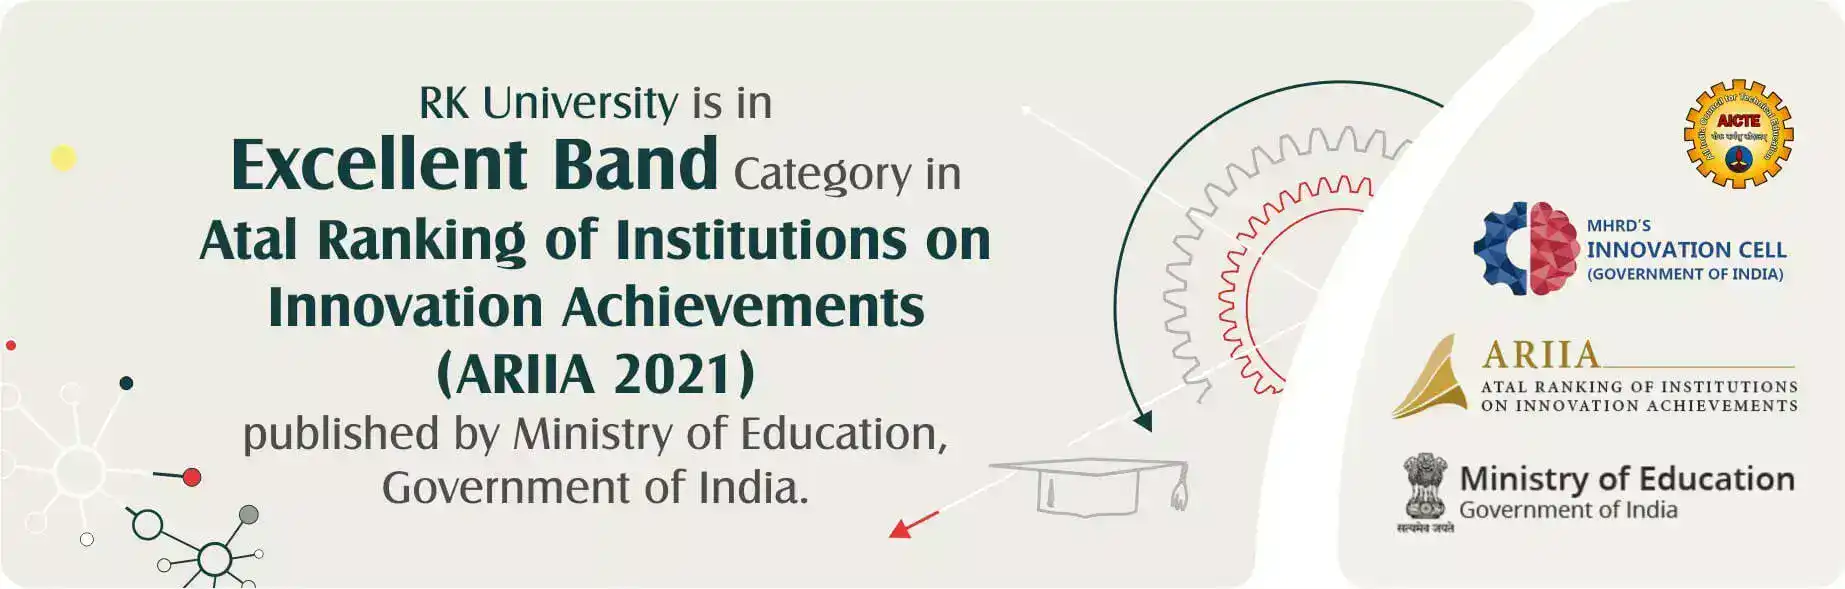 Atal ranking of institutions on innovation achievements